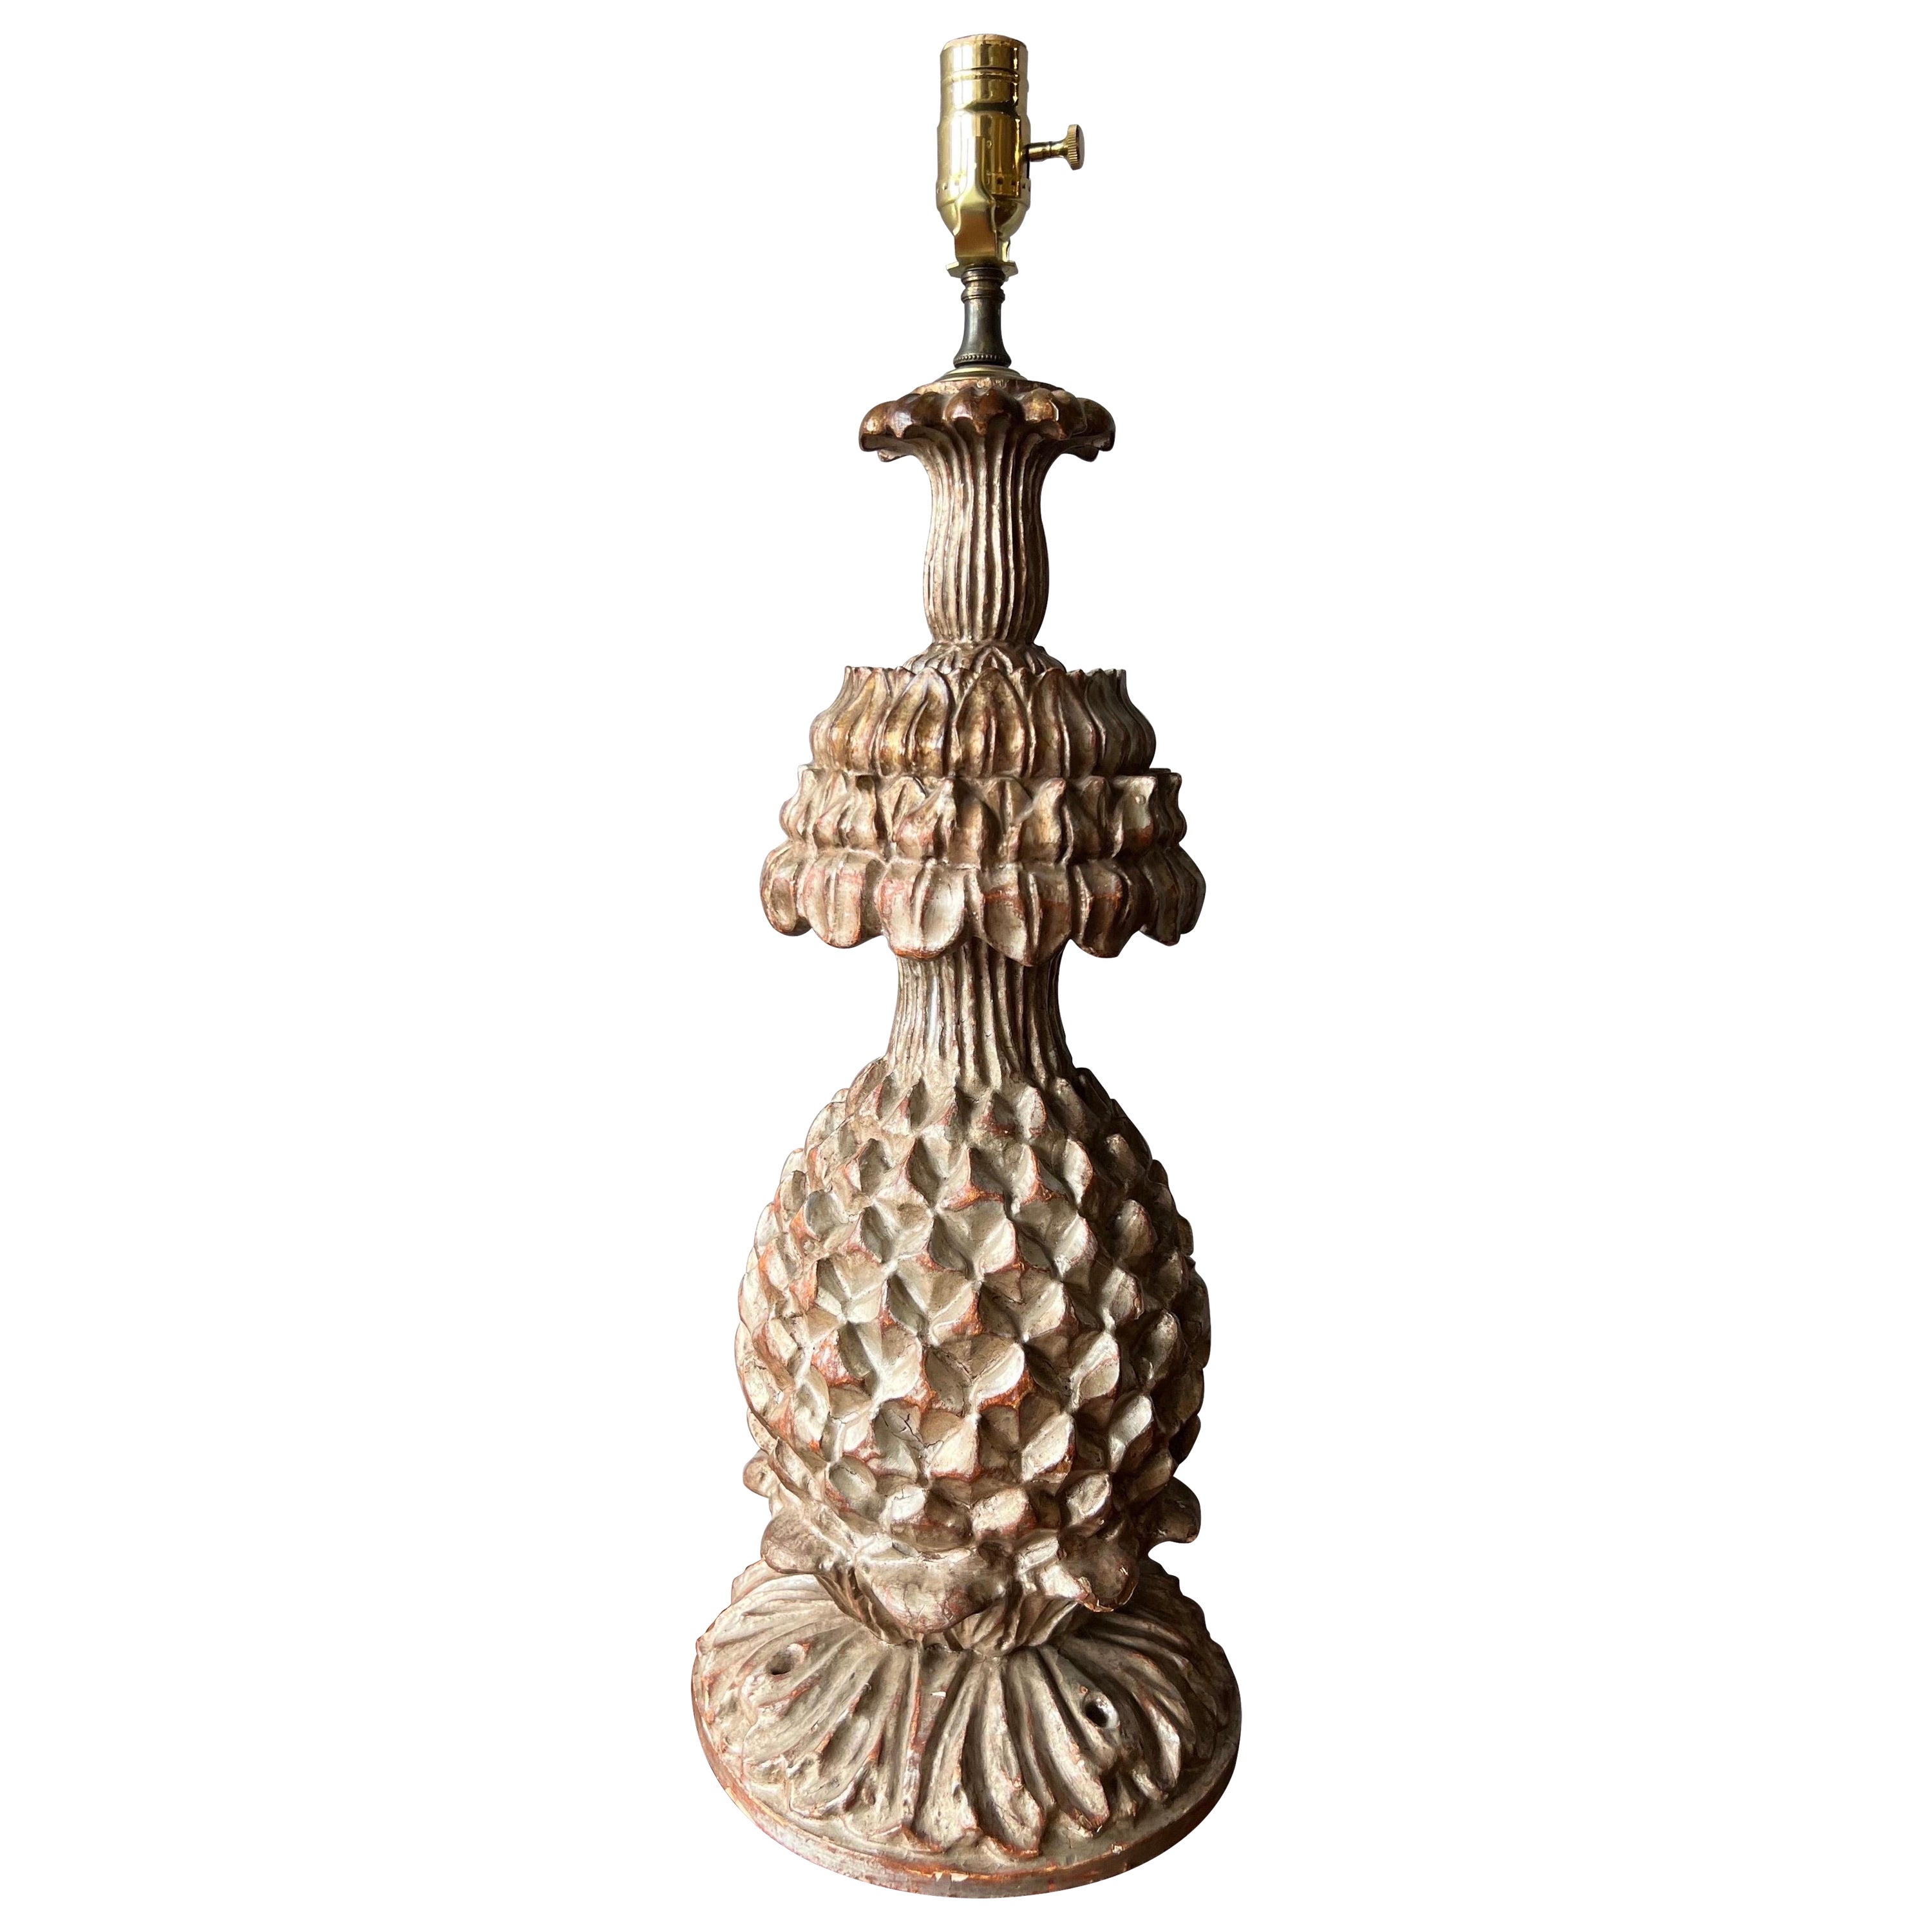 19th Century Silver Leaf Stylized Pineapple Form Lamp